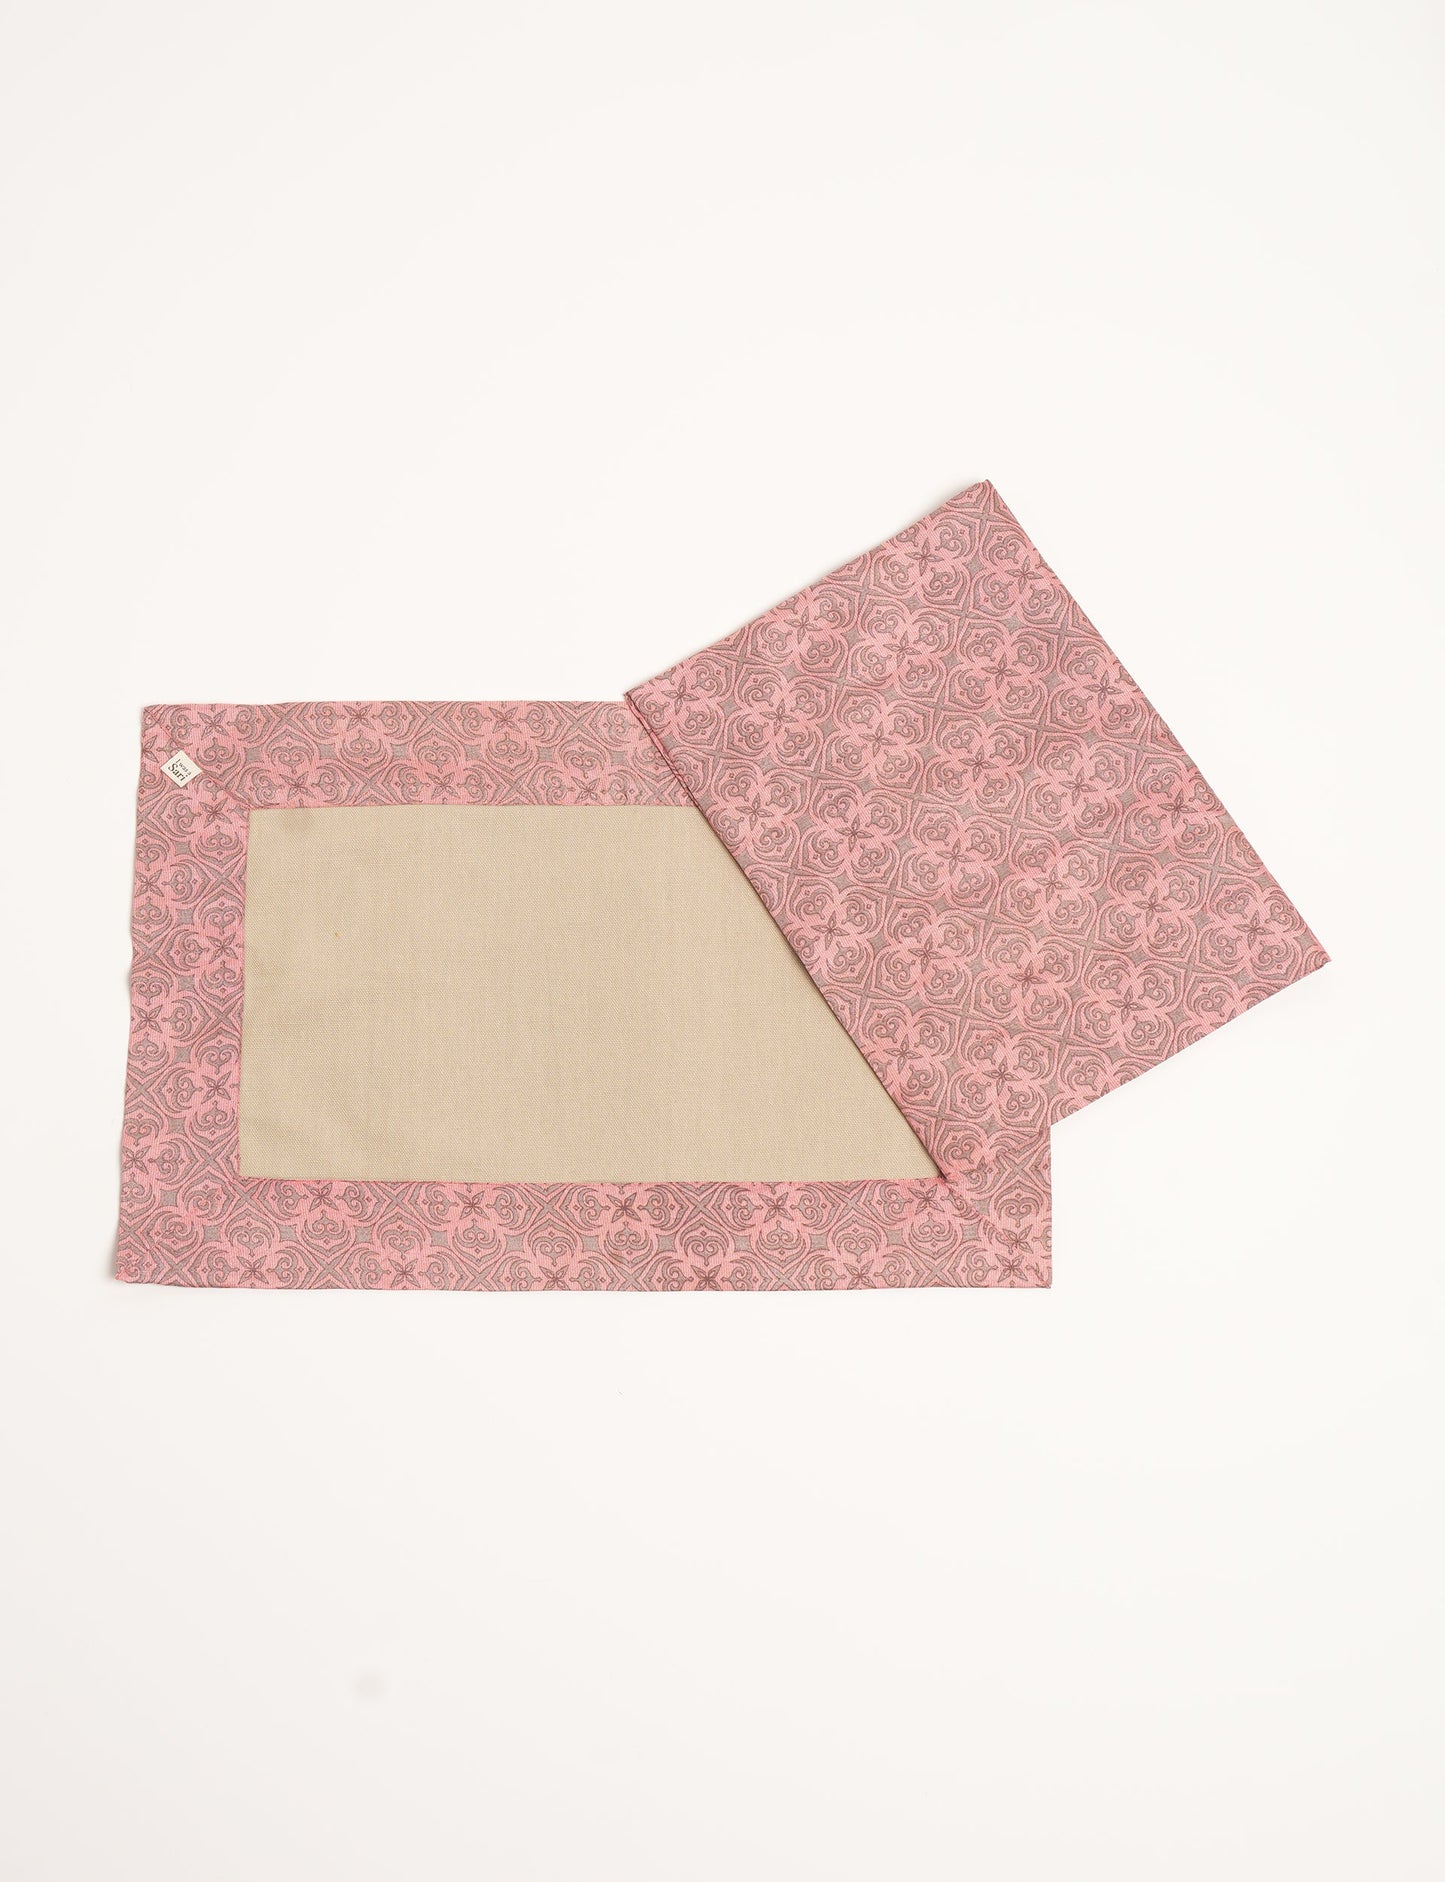 Set of 4 eco-friendly CANVAS PLACEMATS, reversible with pre-loved saris on one side and a blend of 100% cotton canvas and sari fabric on the other. Enhance your dining experience sustainably, knowing you're making a positive impact on the environment. Upcycled, zero waste, and fair trade – the perfect addition to your conscious lifestyle.